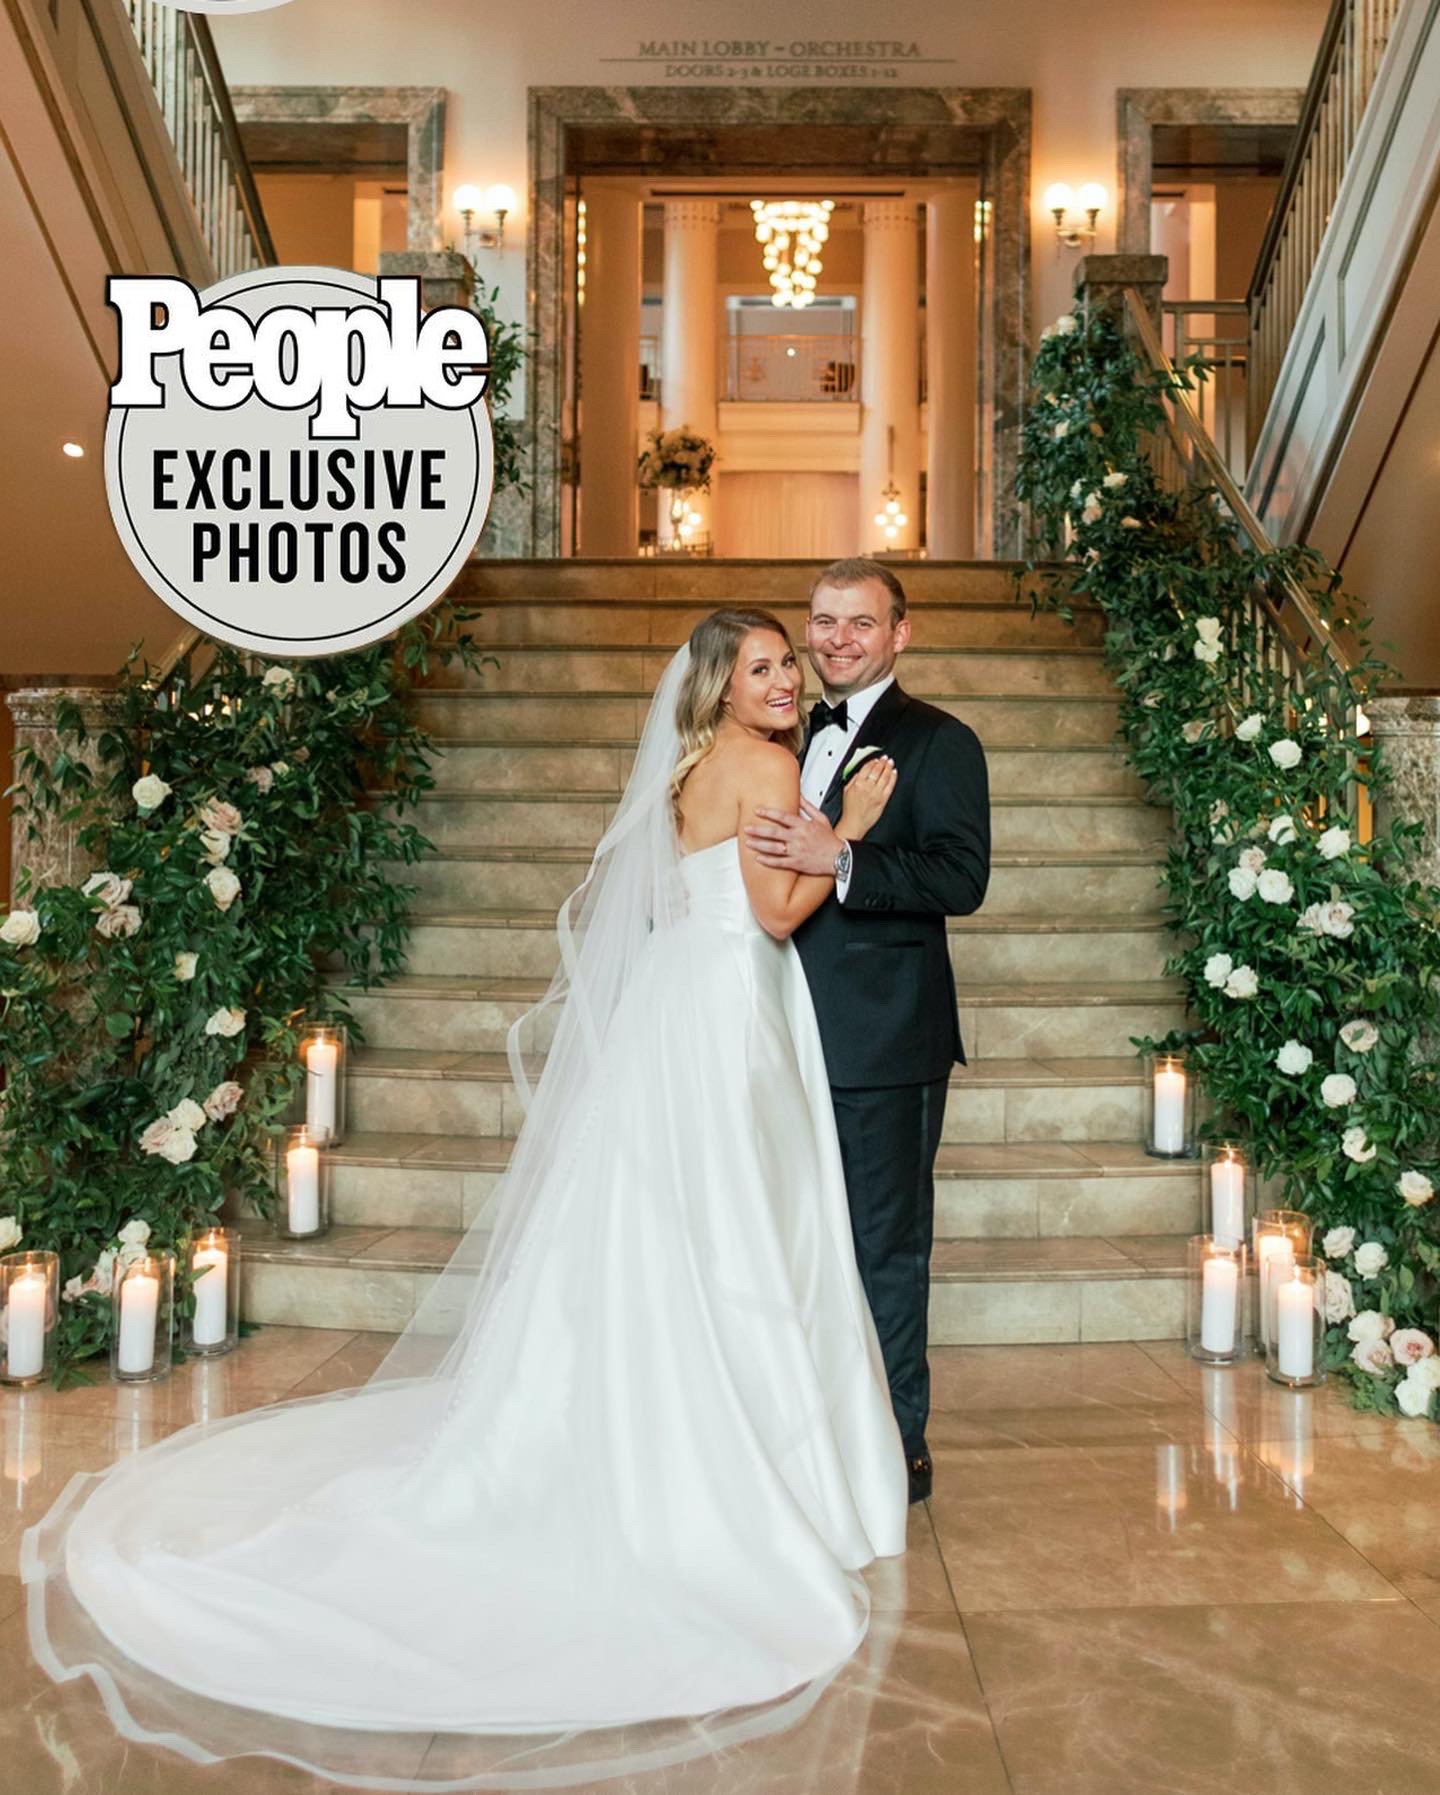 Lena and Michael's downtown Nashville wedding is featured in People Magazine